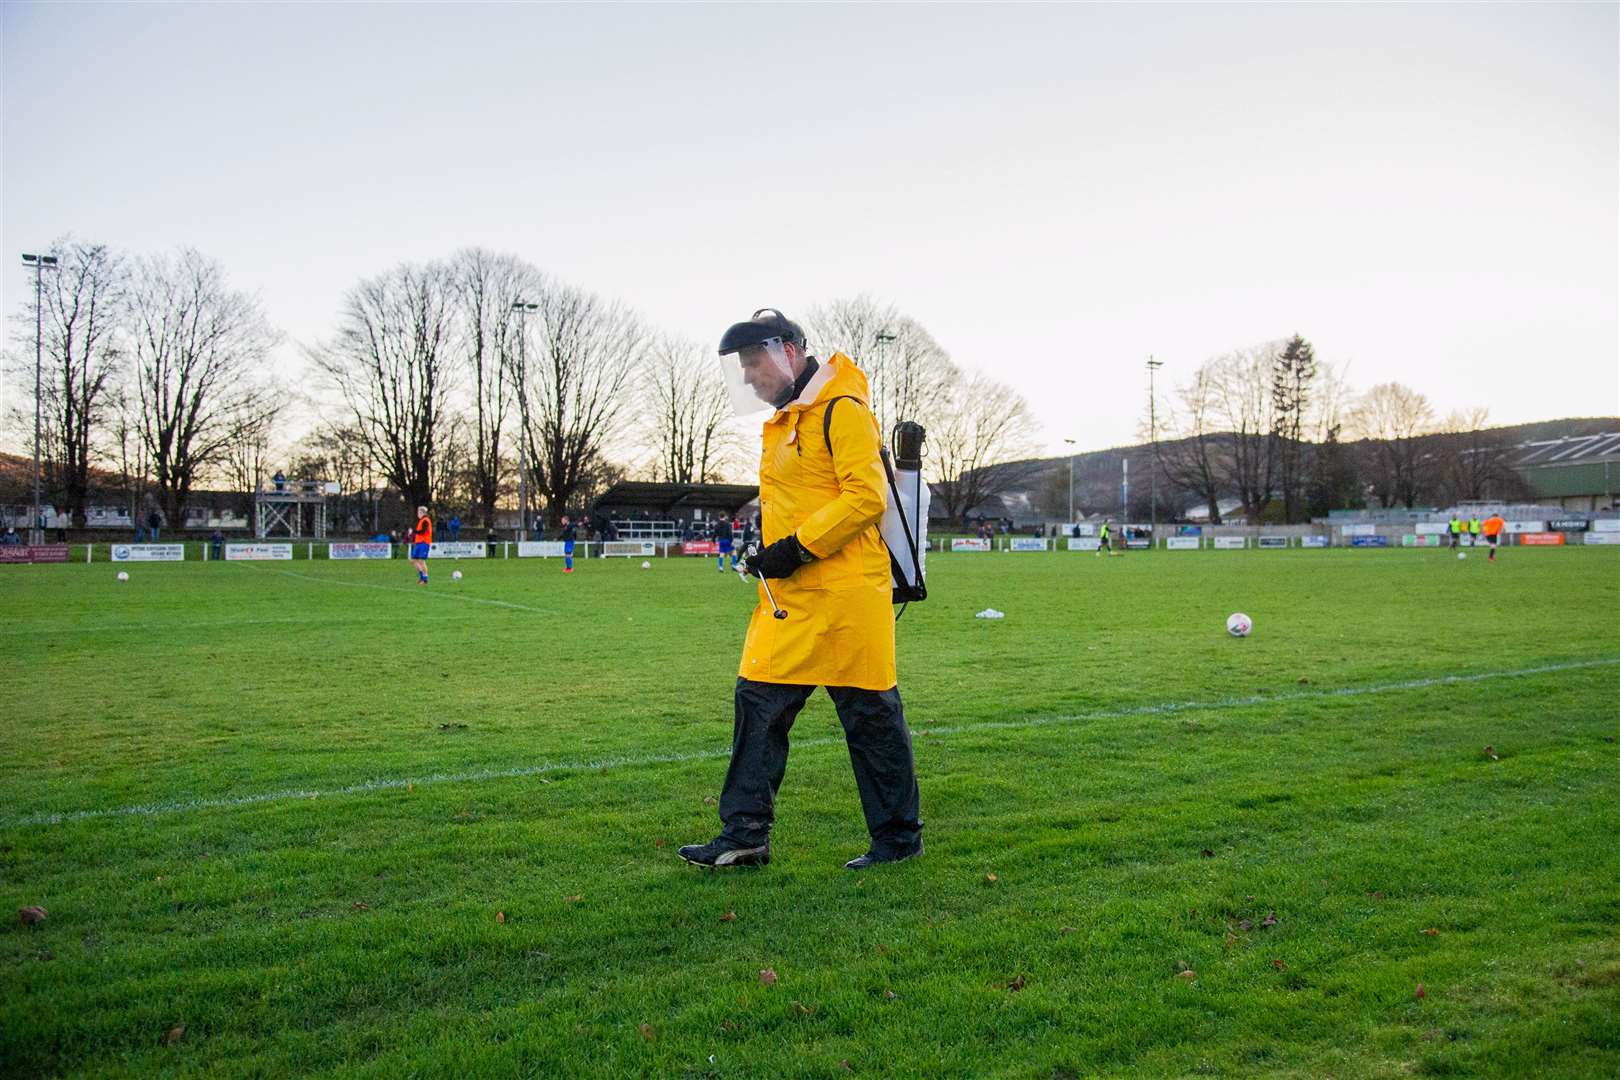 A sign of the times as full PPE is required to santise the corner flags, balls and goals...Rothes FC (1) vs Huntly FC (0) - Highland Football League - Mackessack Park , Rothes 28/11/2020...Picture: Daniel Forsyth..